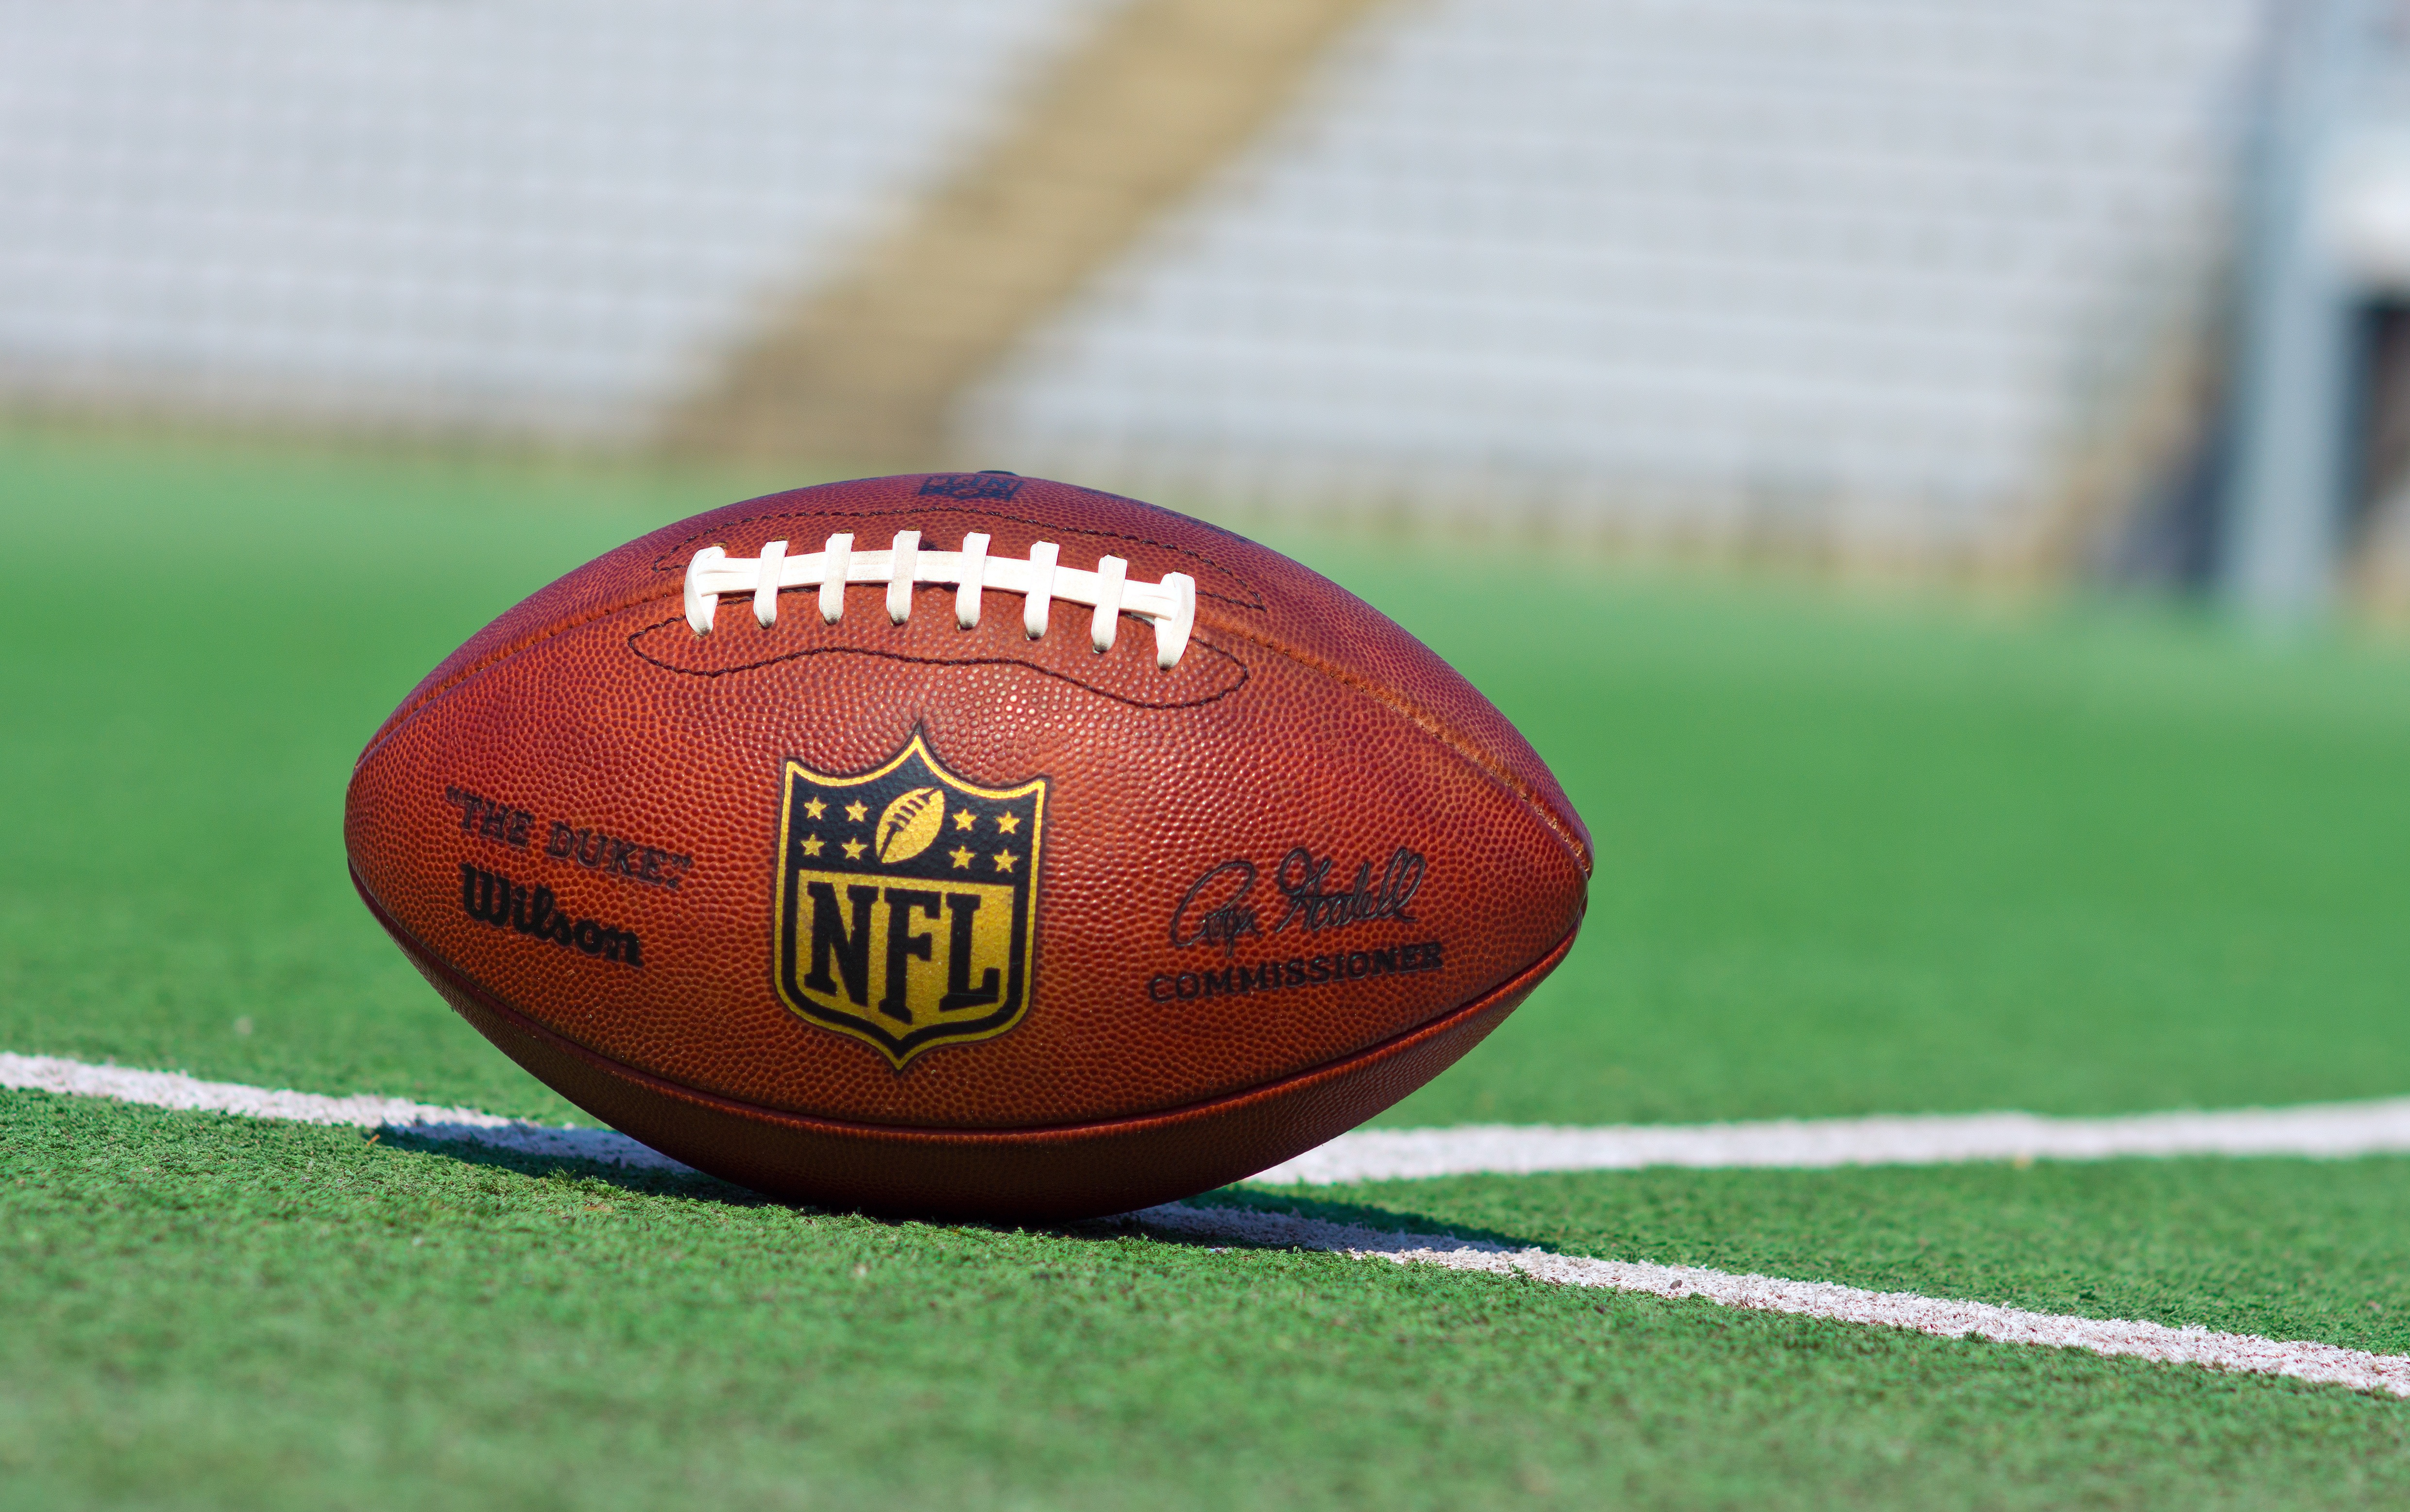 Netflix Now Streams a Weekly News Show About the NFL Called Inside The NFL